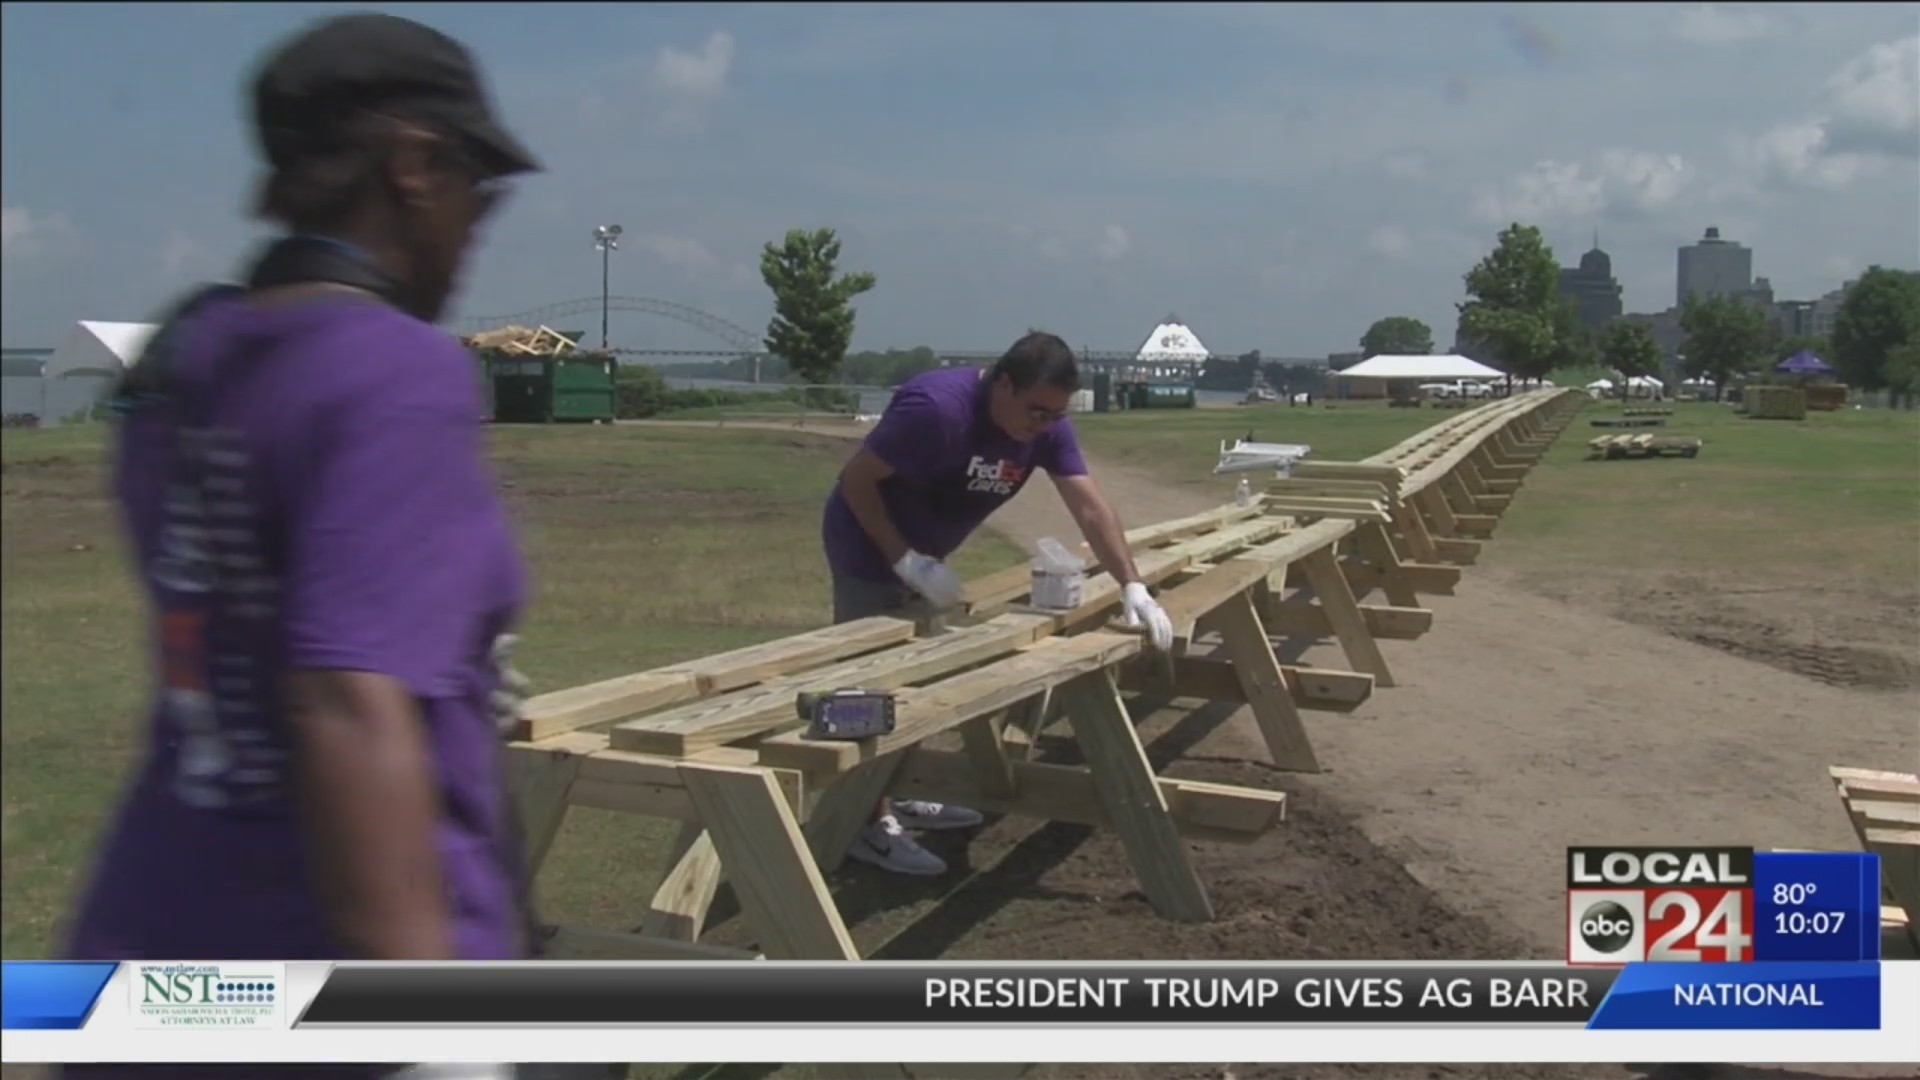 CELEBRATE MEMPHIS: attempting world record for longest picnic table